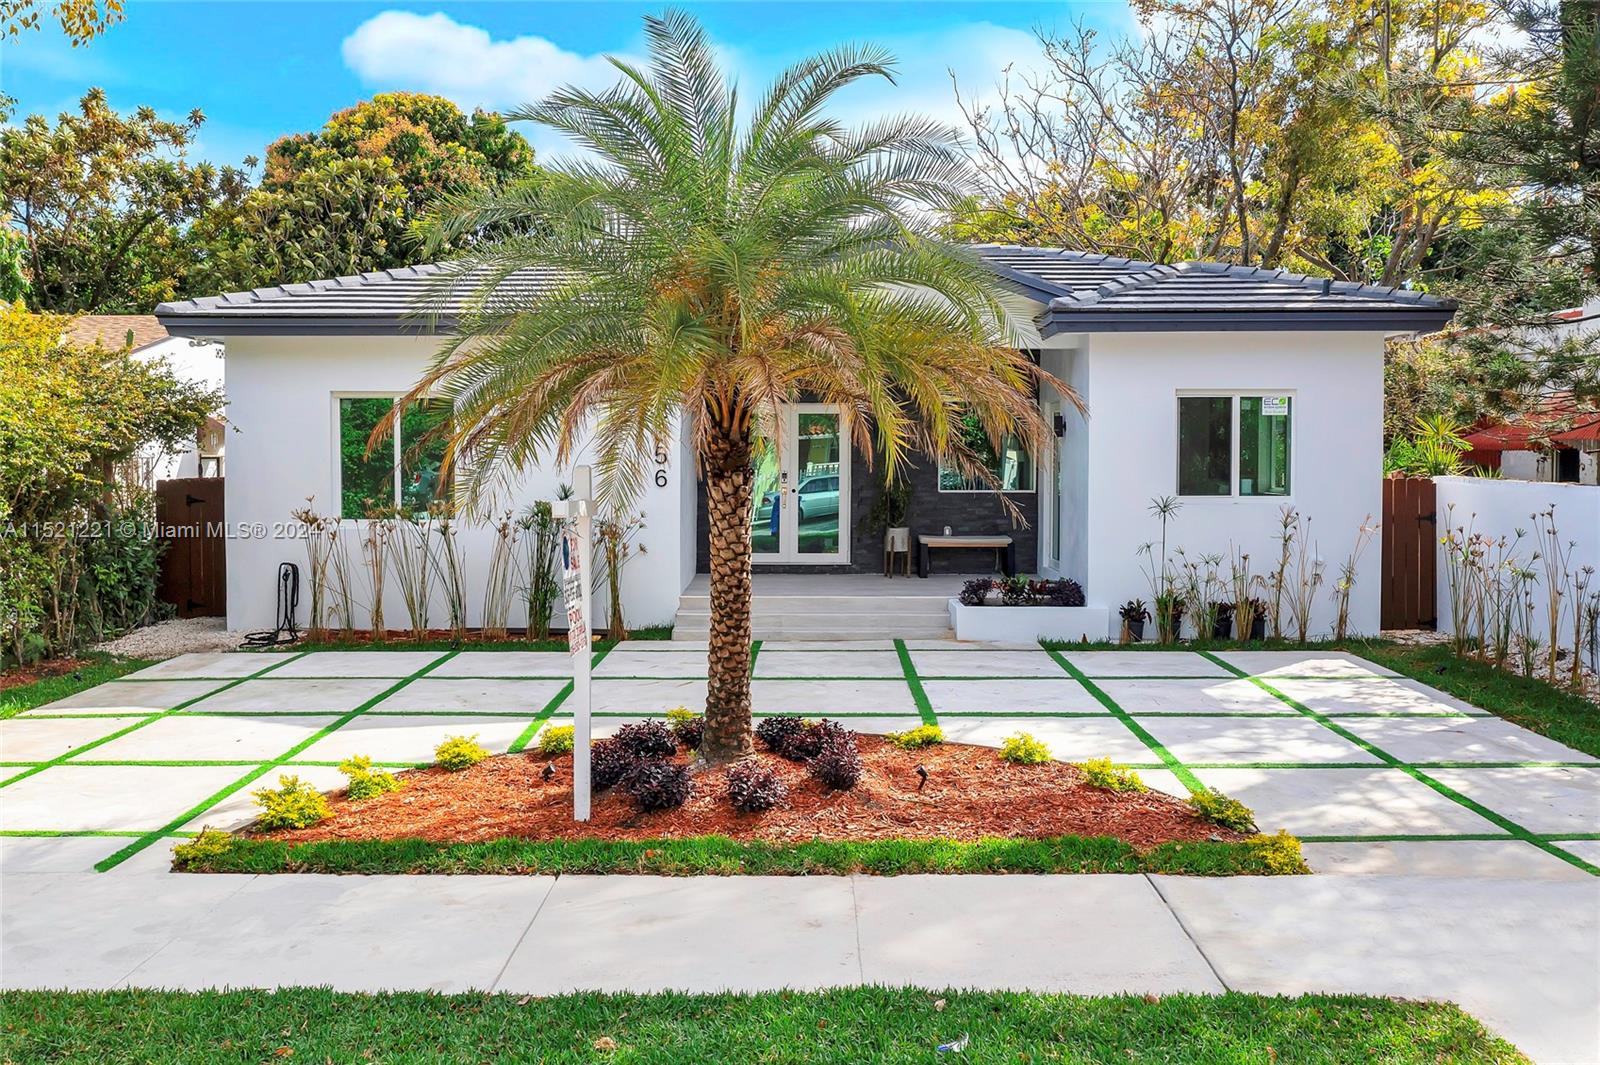 a view of a backyard with plants and palm tree